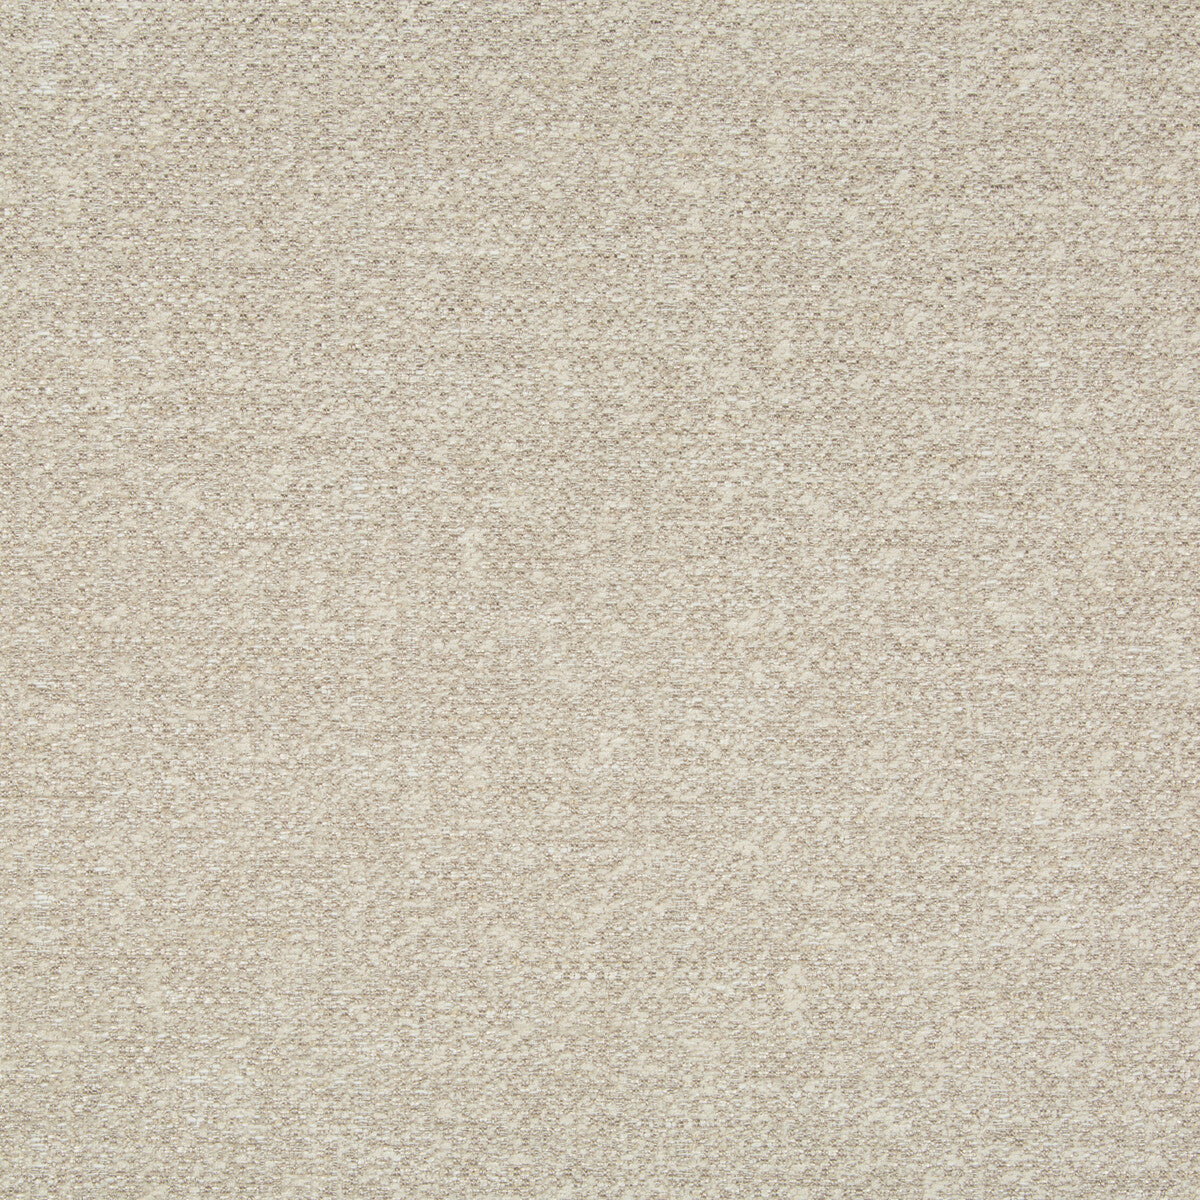 Dovecoat fabric in stone color - pattern 34904.11.0 - by Kravet Basics in the Thom Filicia Altitude collection